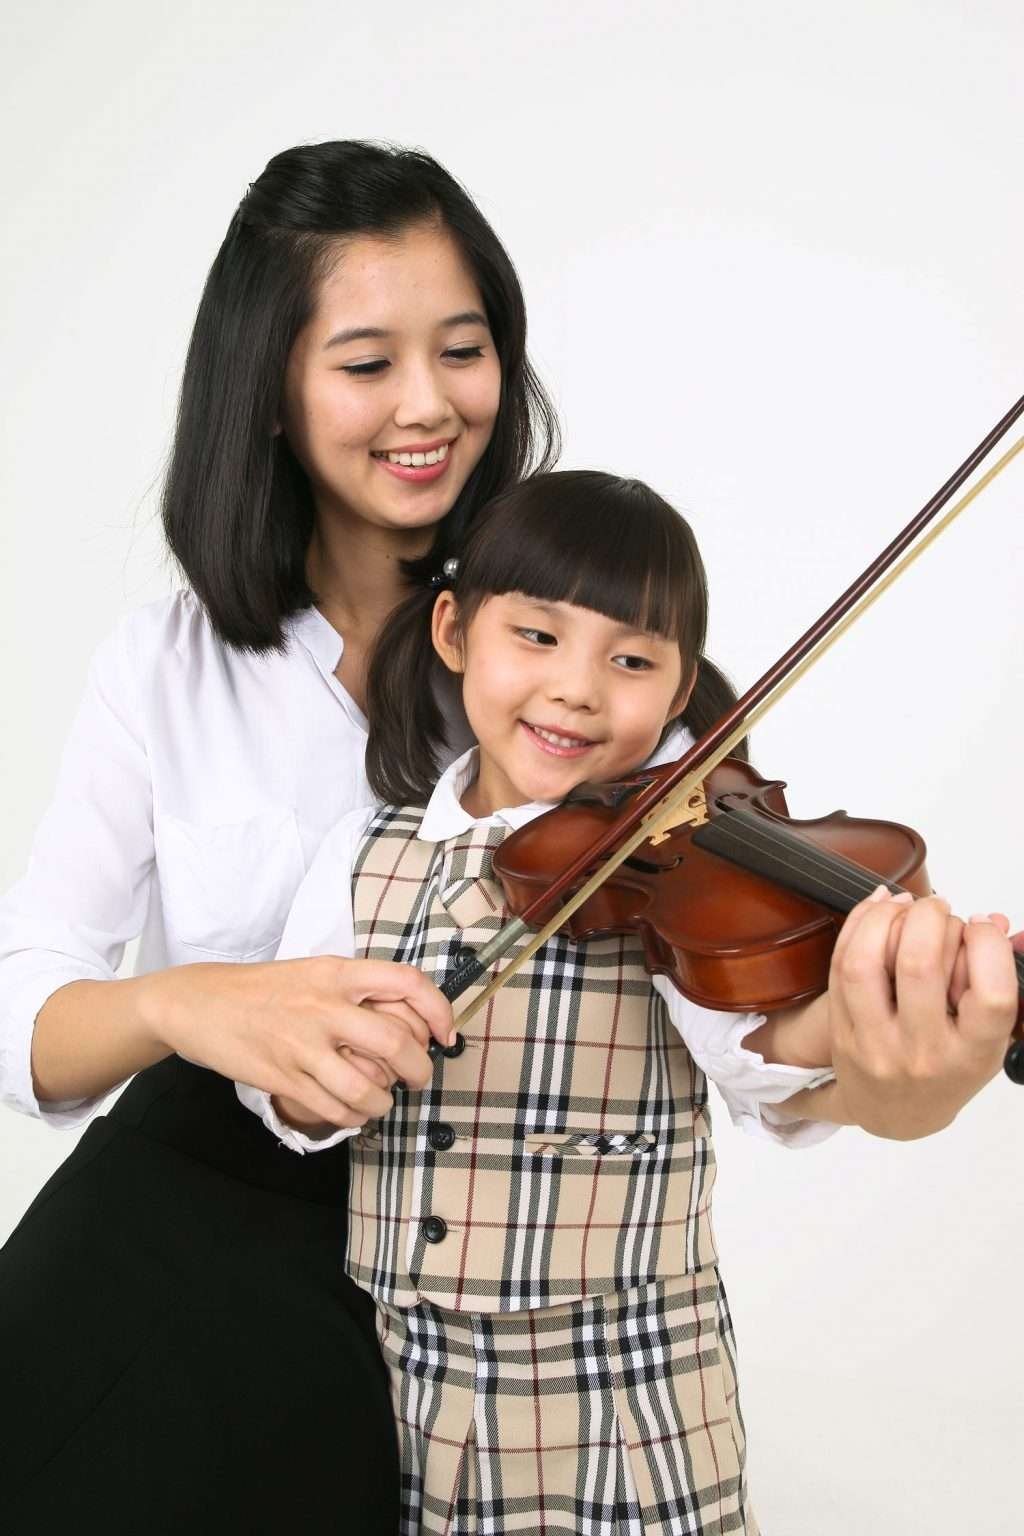 violin instructor with her young girl student